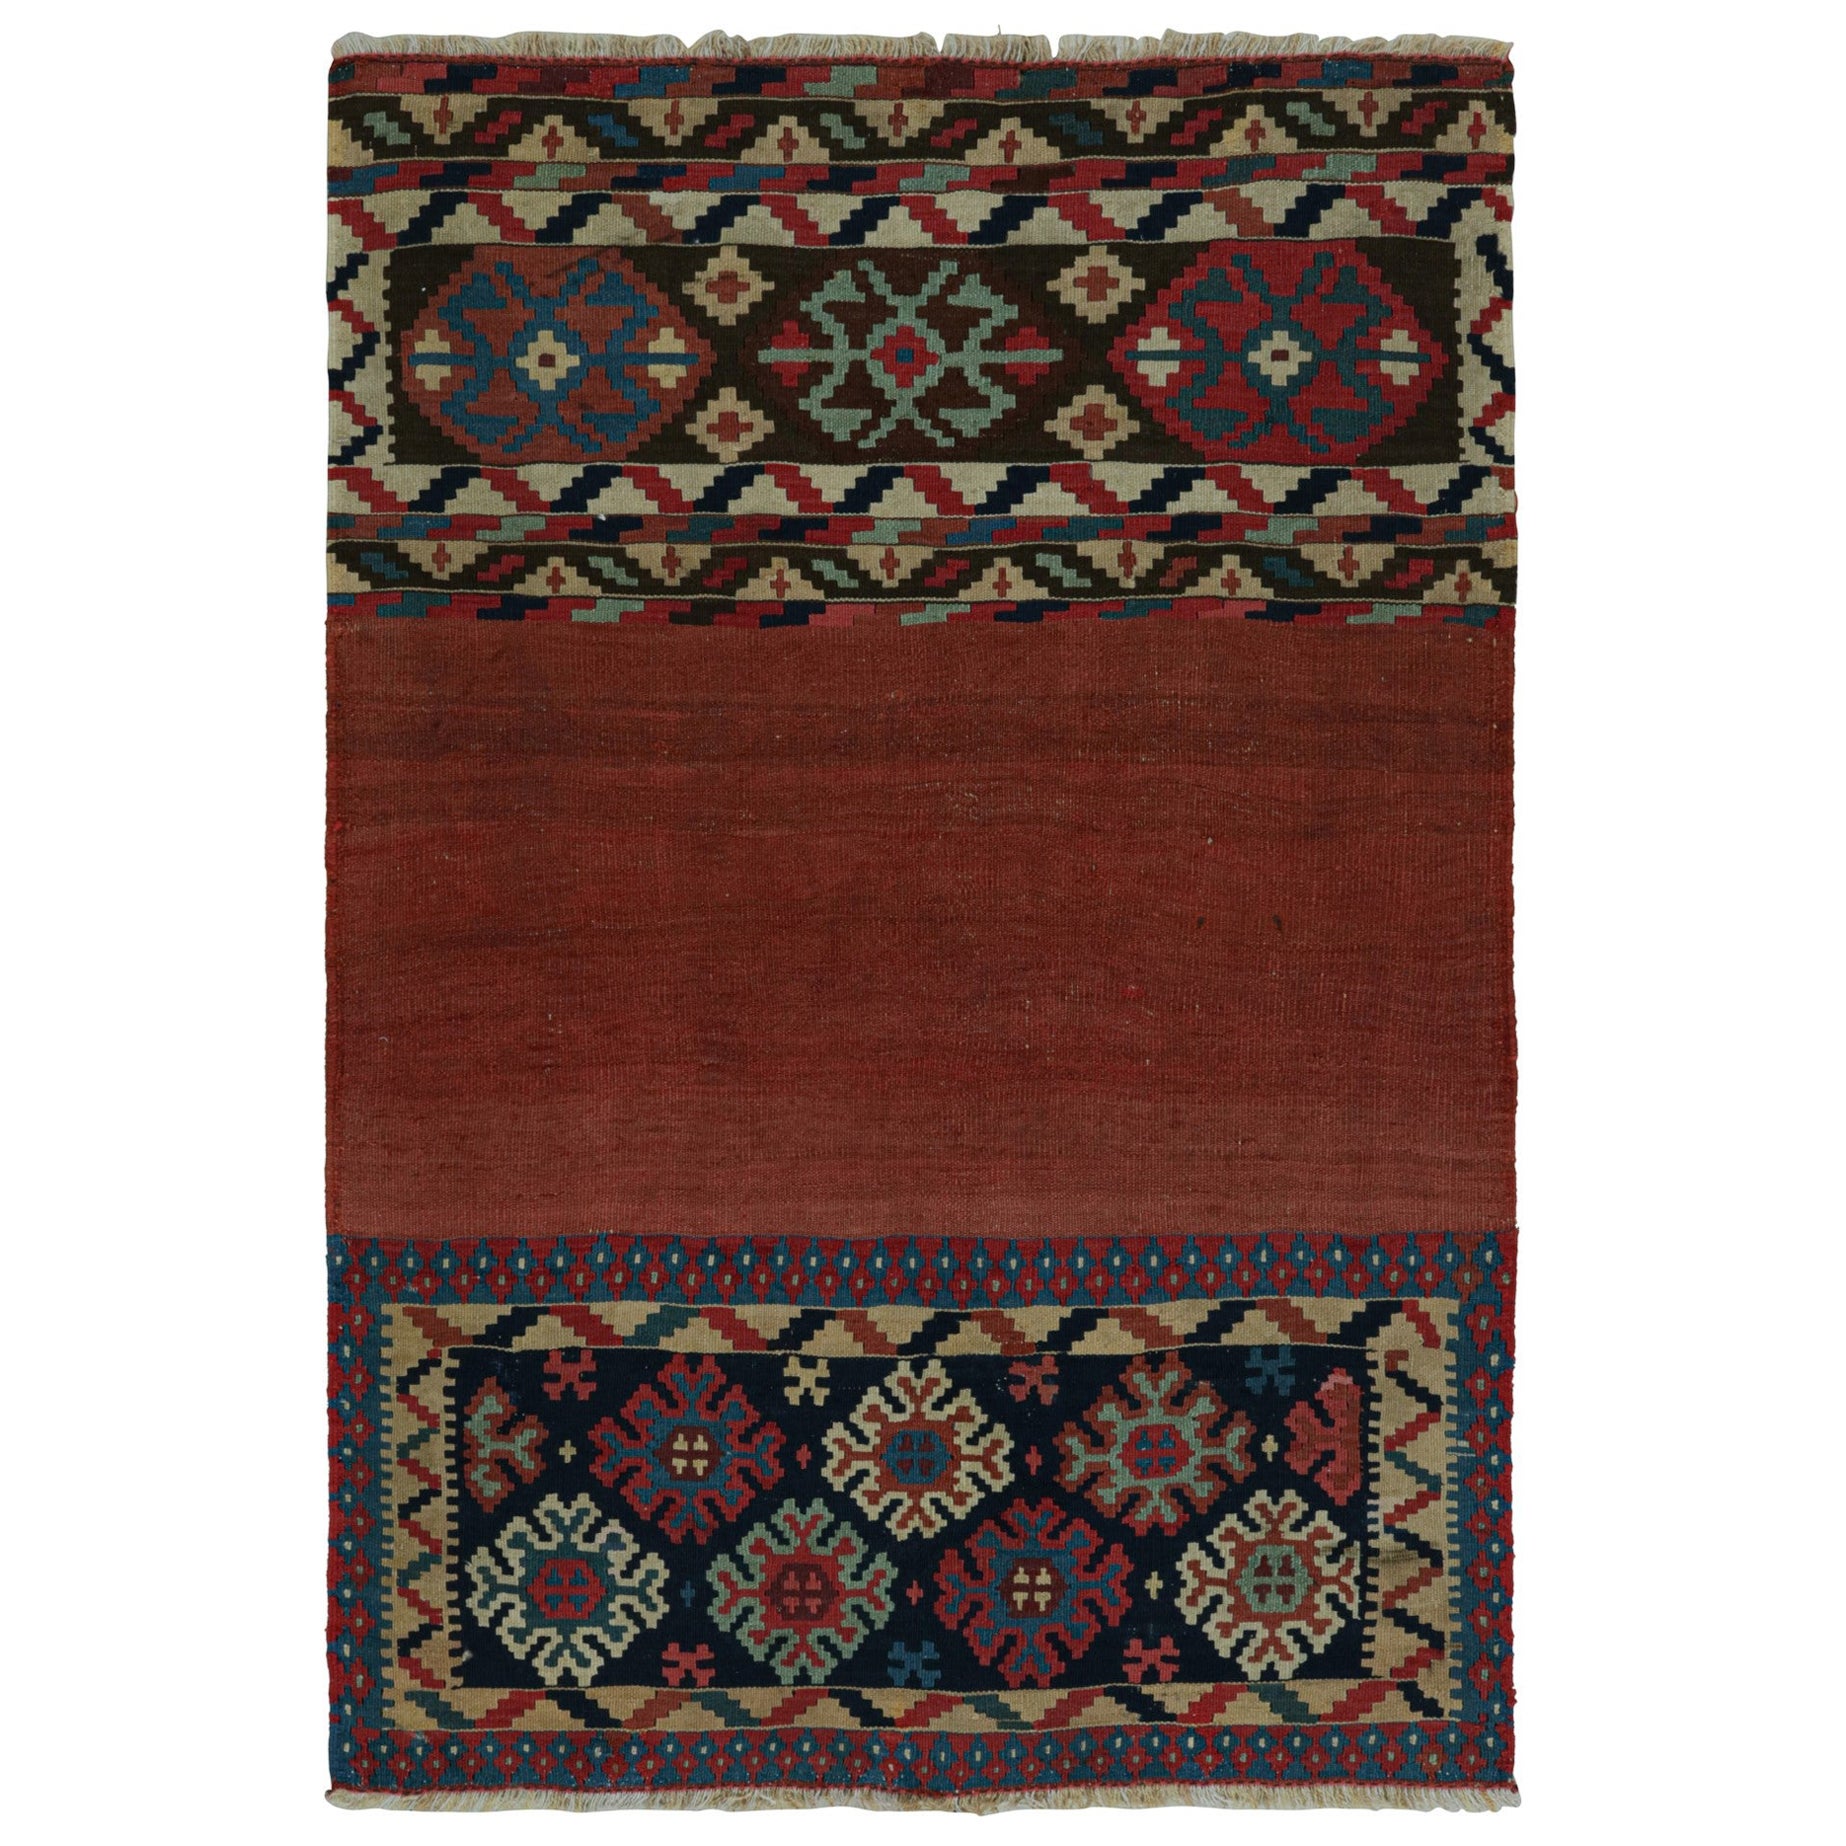 Rug & Kilim’s Afghan Tribal Kilim Rug in Red, with Colorful Geometric Patterns For Sale